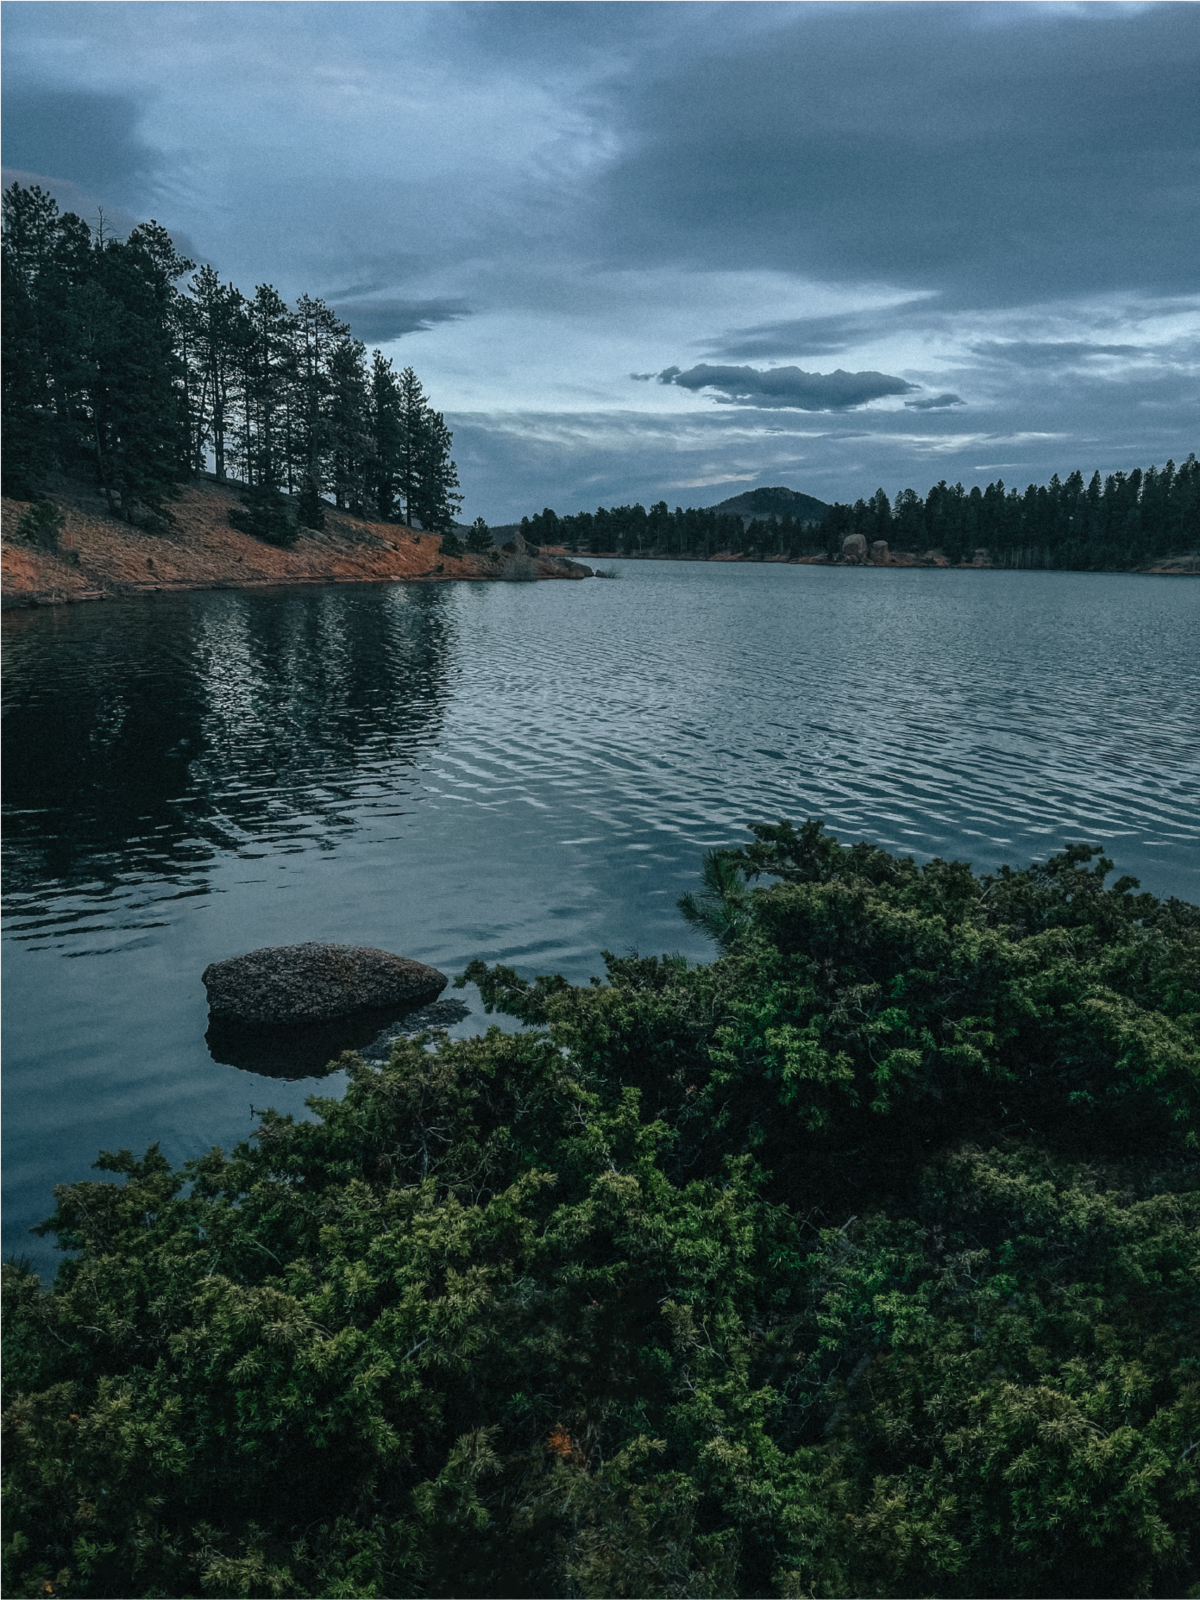 Image of a lake on a cloudy day